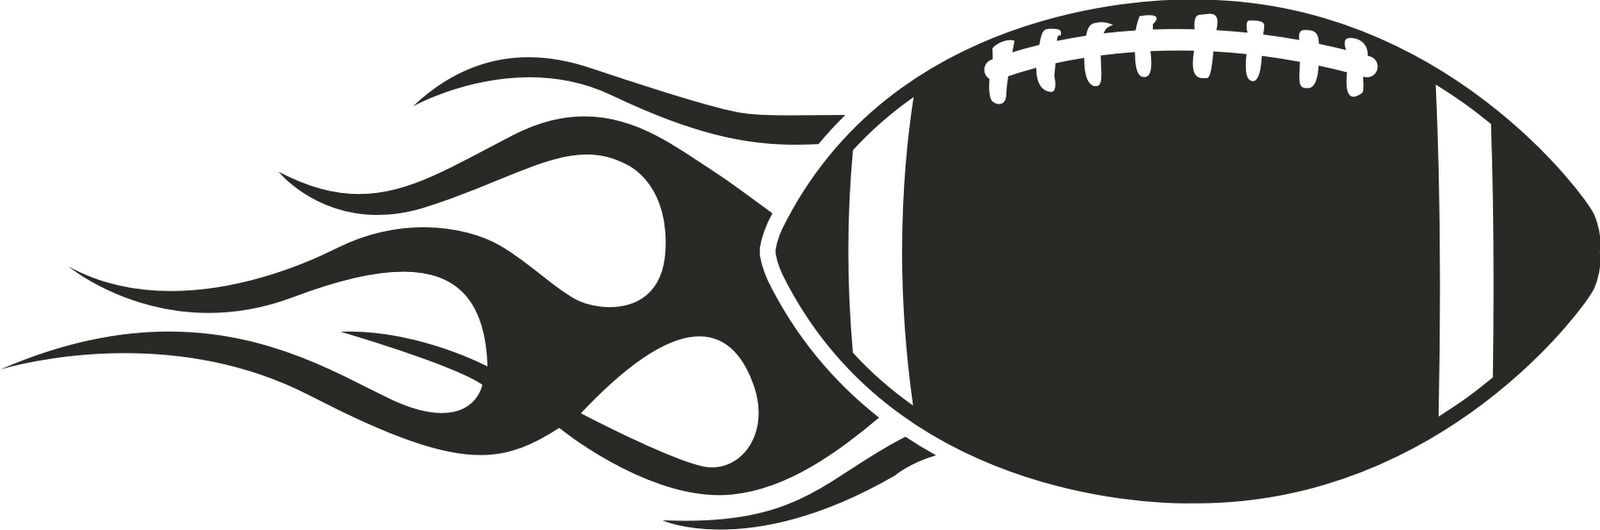 Football Clipart Free Download